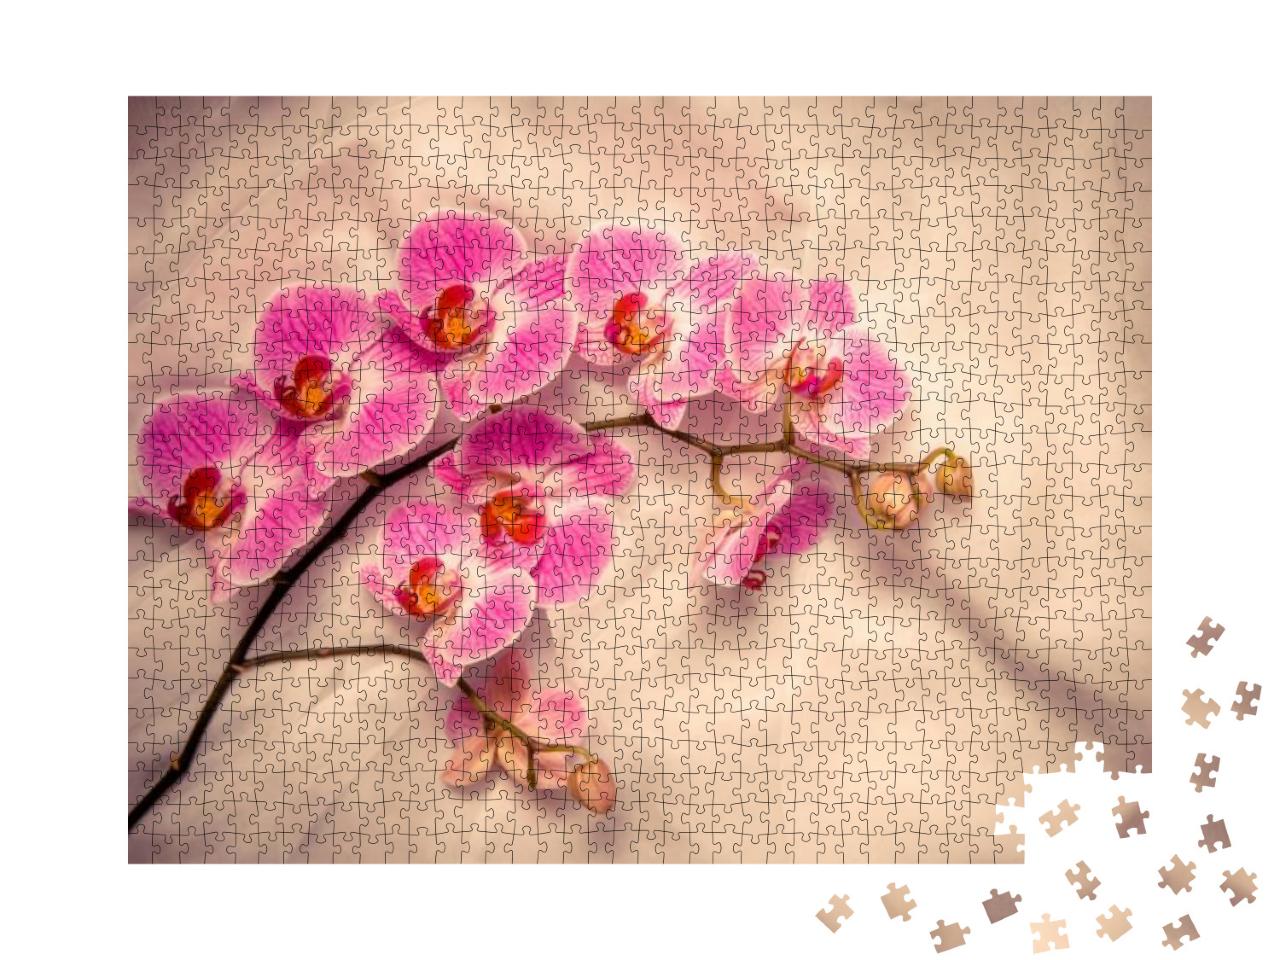 The Branch of Purple Orchids on White Fabric Background... Jigsaw Puzzle with 1000 pieces